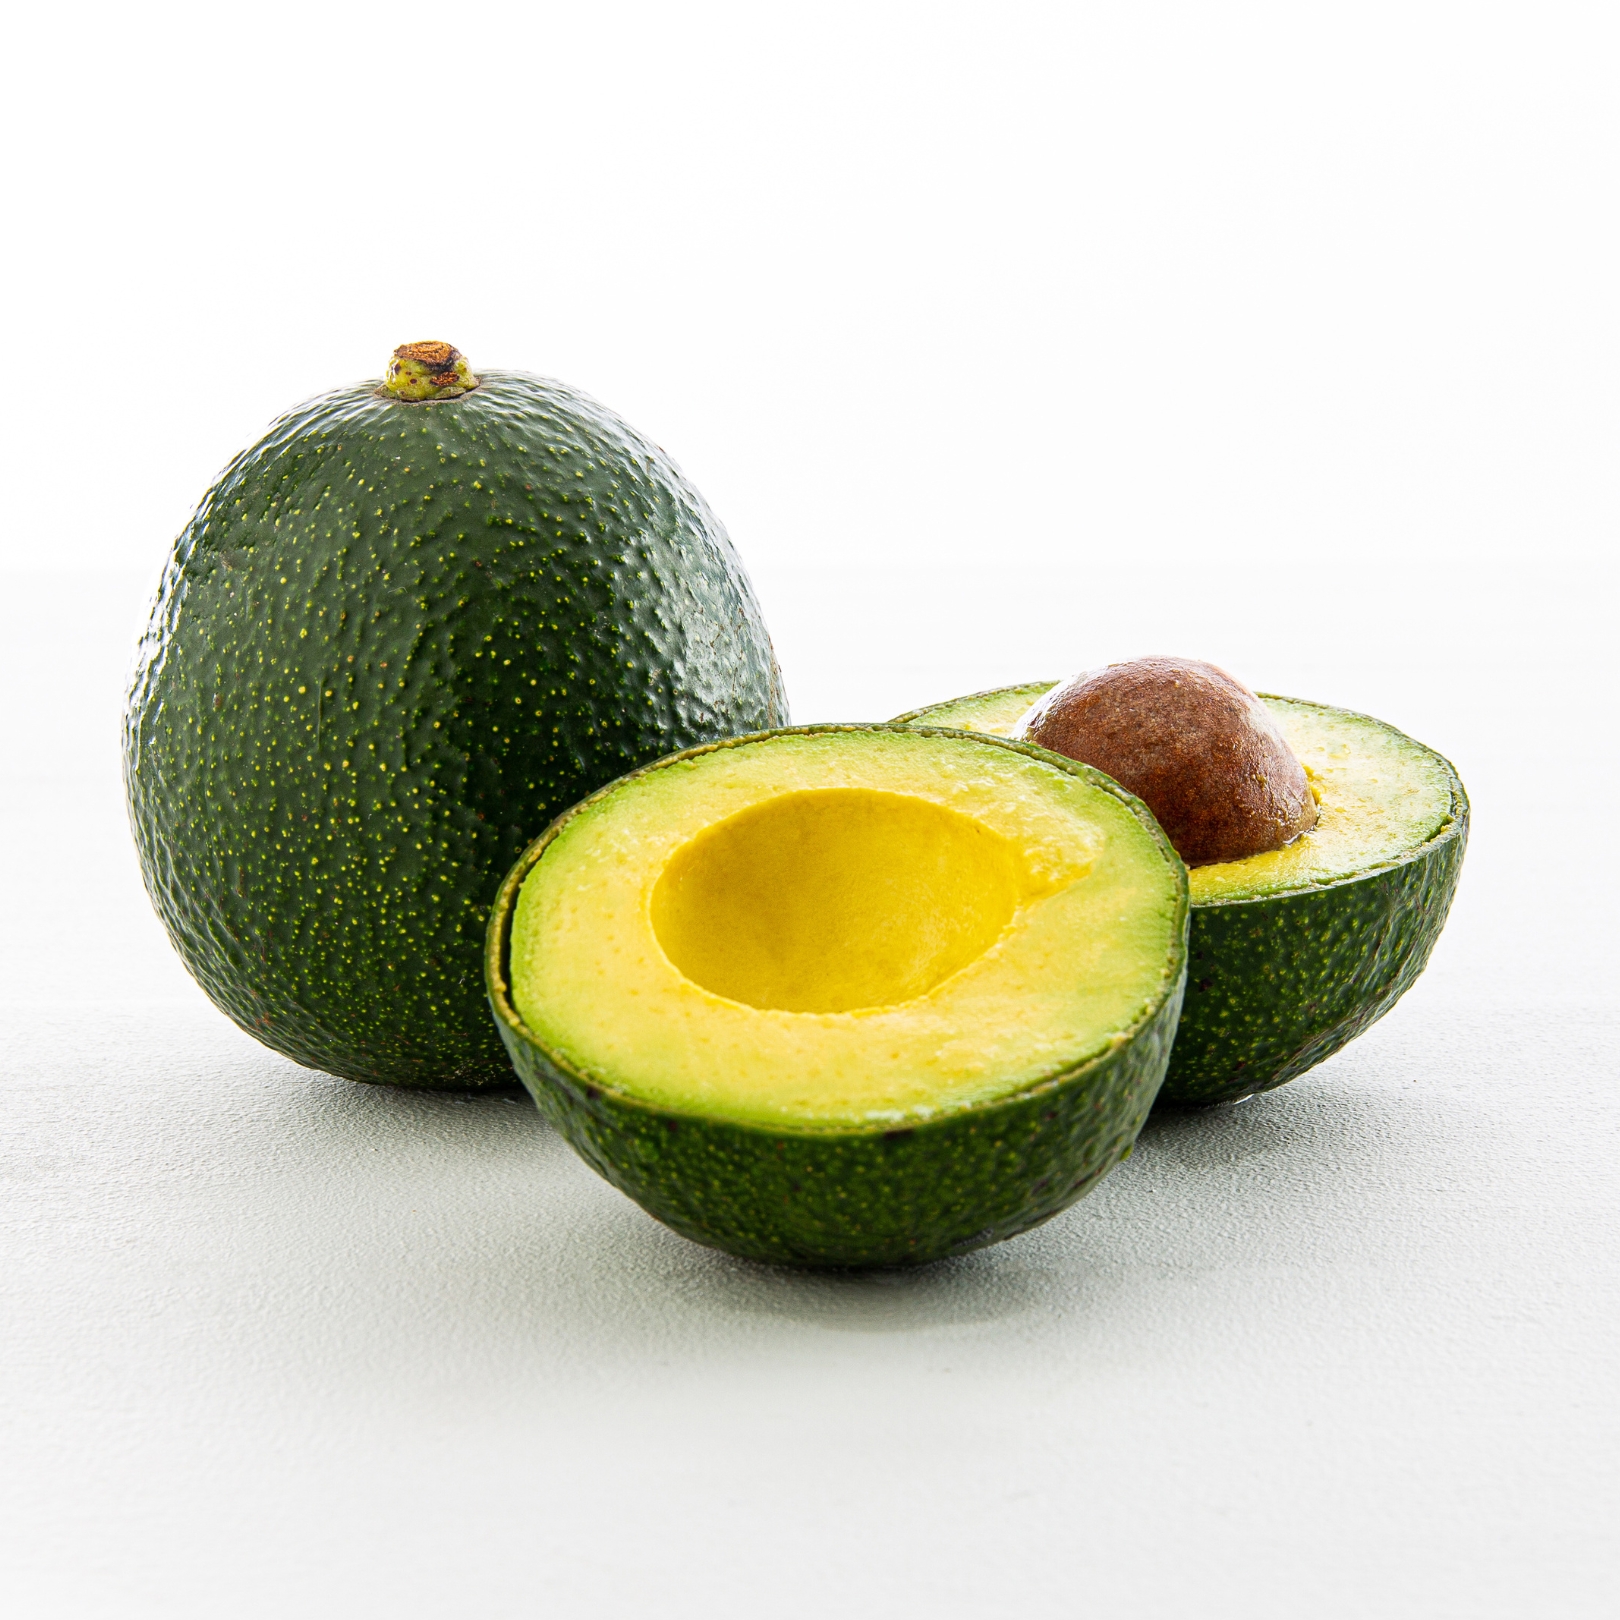 Buy Avocados - Reed Online NZ - Twisted Citrus